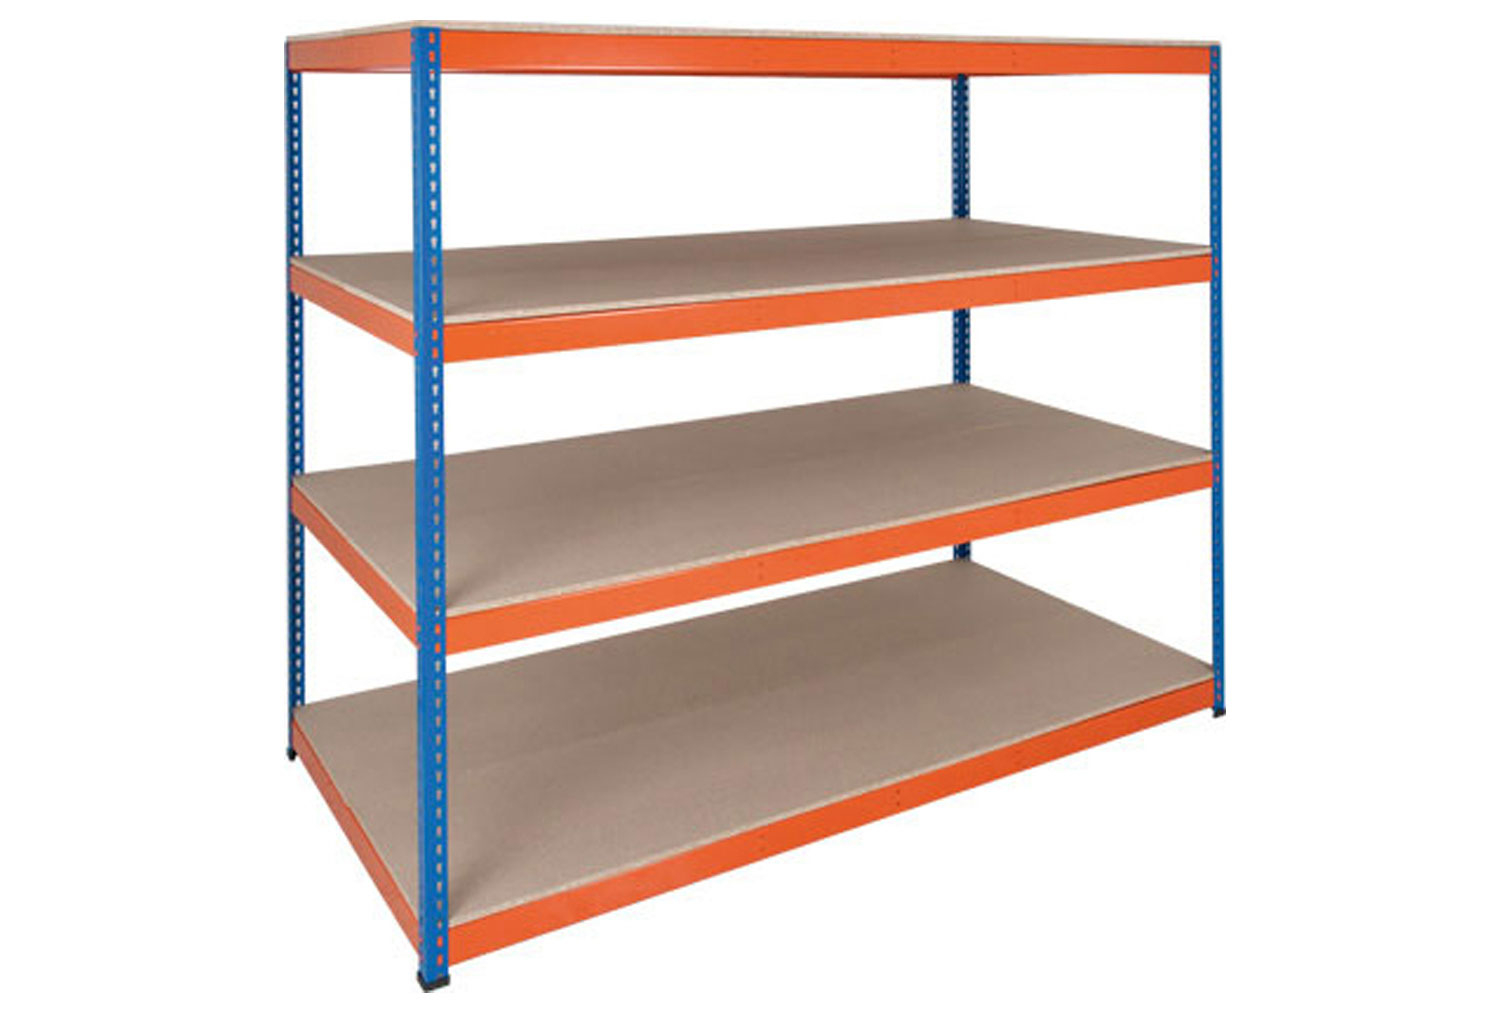 Rapid 1 Heavy Duty Shelving With 4 Chipboard Shelves 2440wx1980h (Blue/Orange), Express Delivery